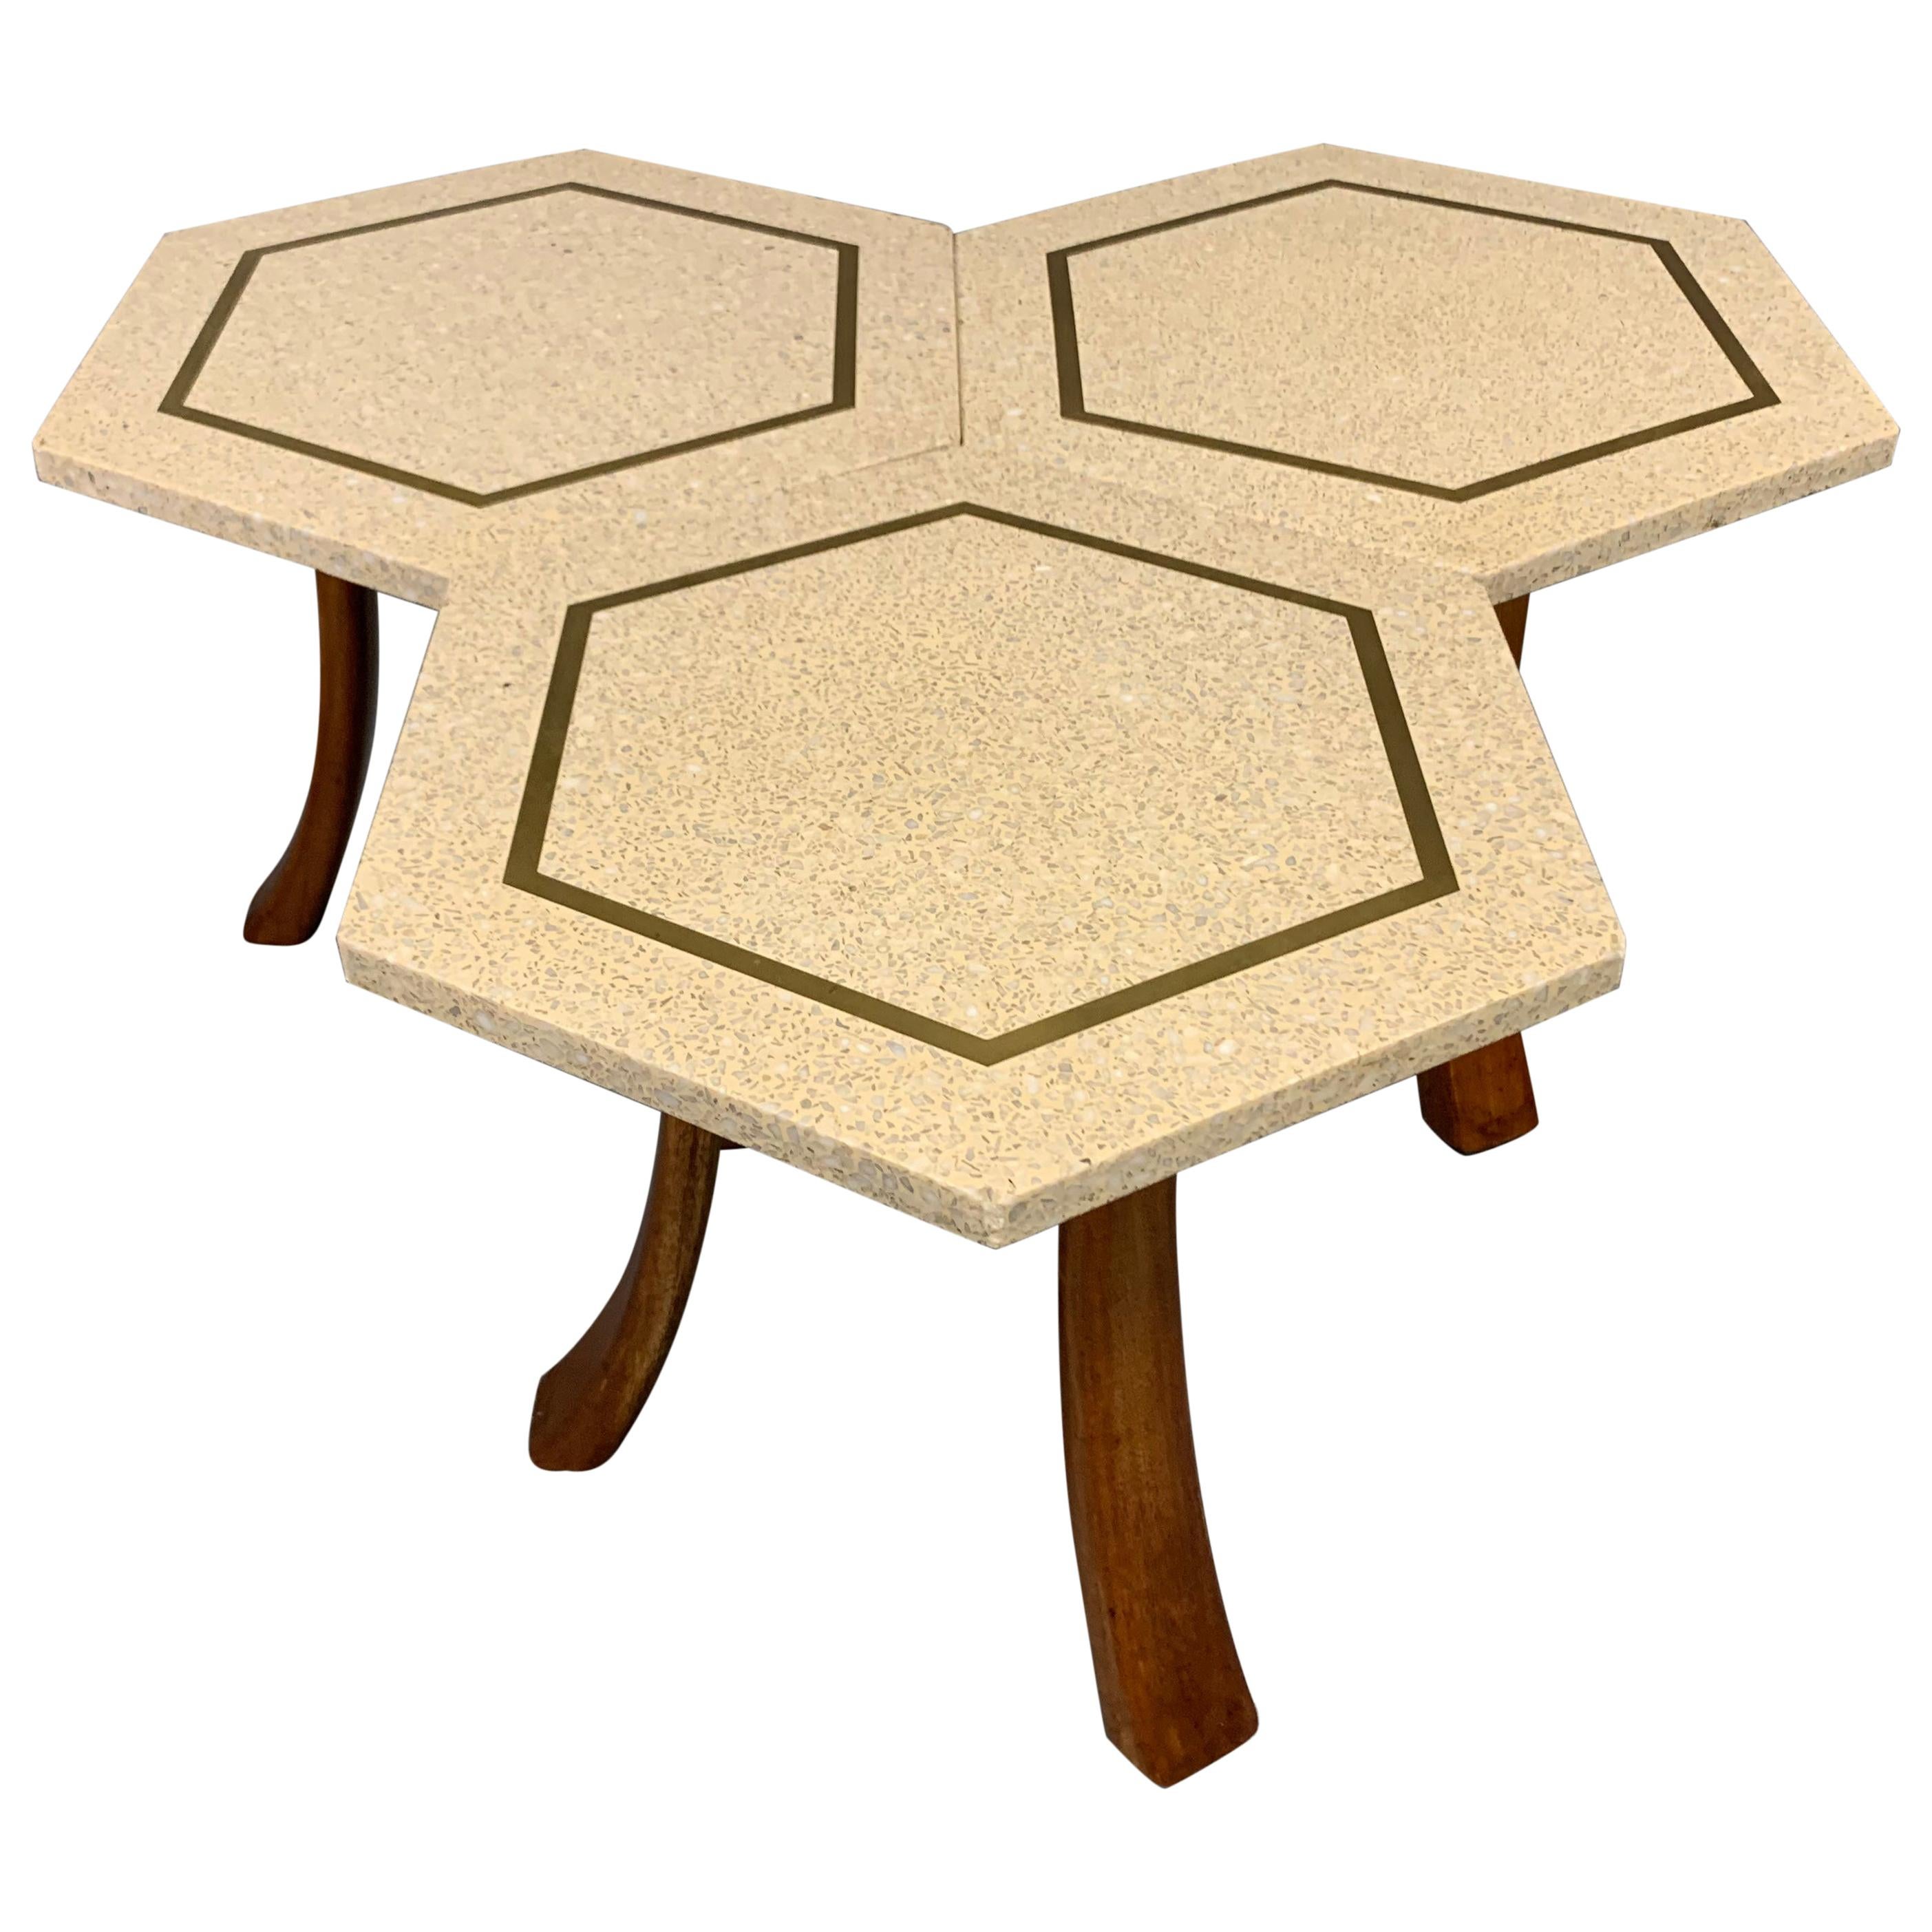 Hexagonal Side Table Set by Harvey Probber with Terrazzo Stone Top, Brass Inlay